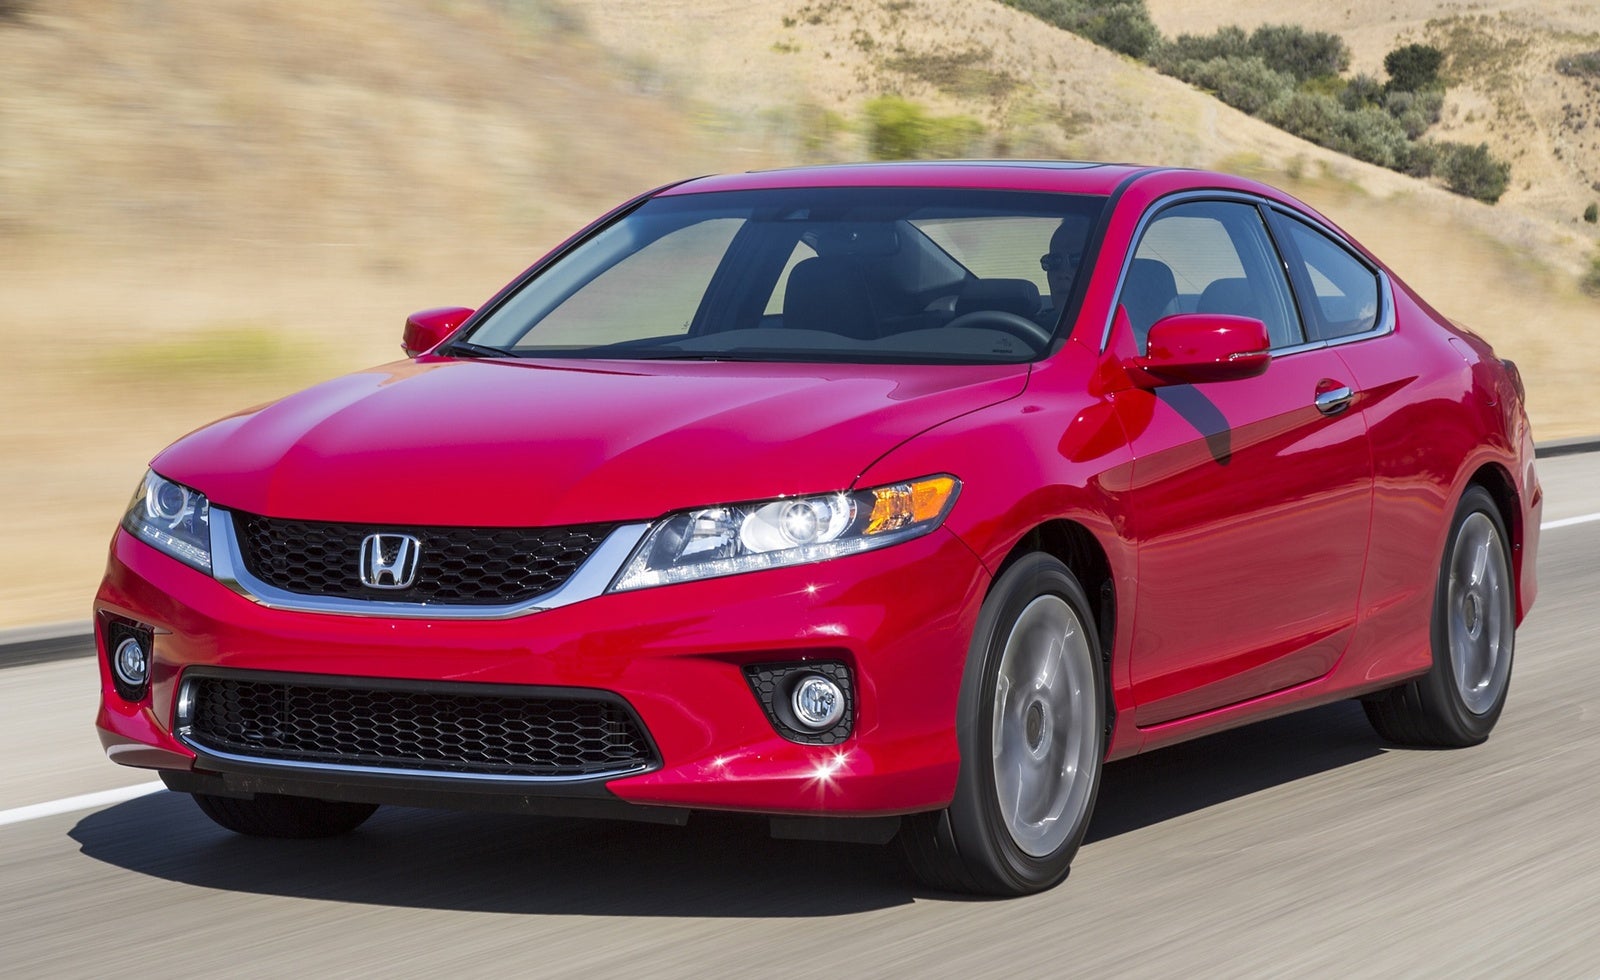 New 2015 Honda Accord Coupe For Sale - CarGurus